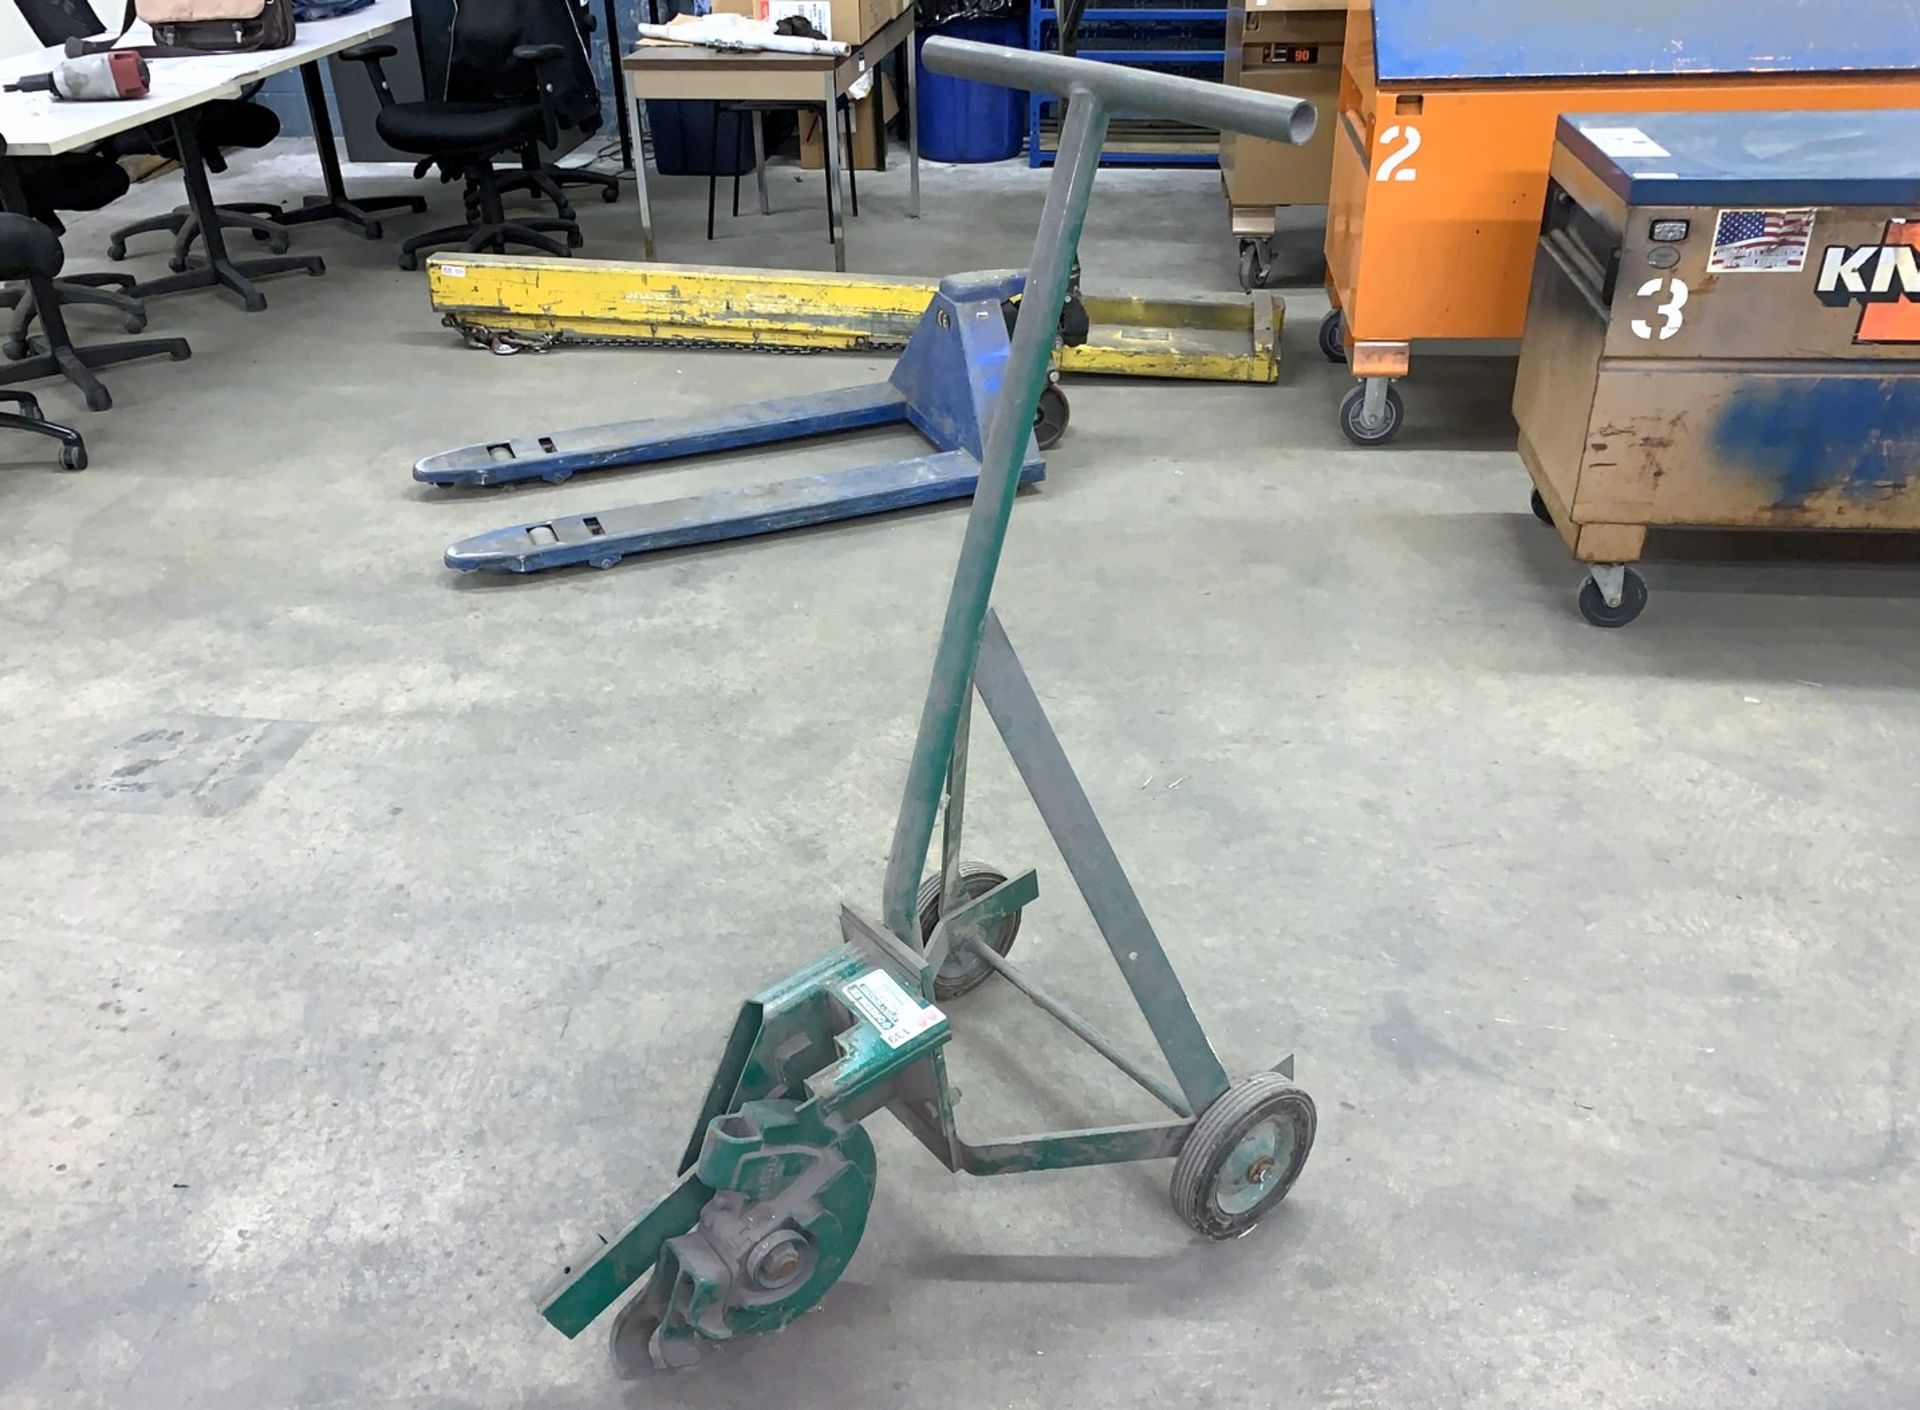 Greenlee Mdl. 1800 Mechanical Bender for 1/2", 3/4" and 1" Rigid Steel and Aluminum Conduit (All - Image 2 of 4